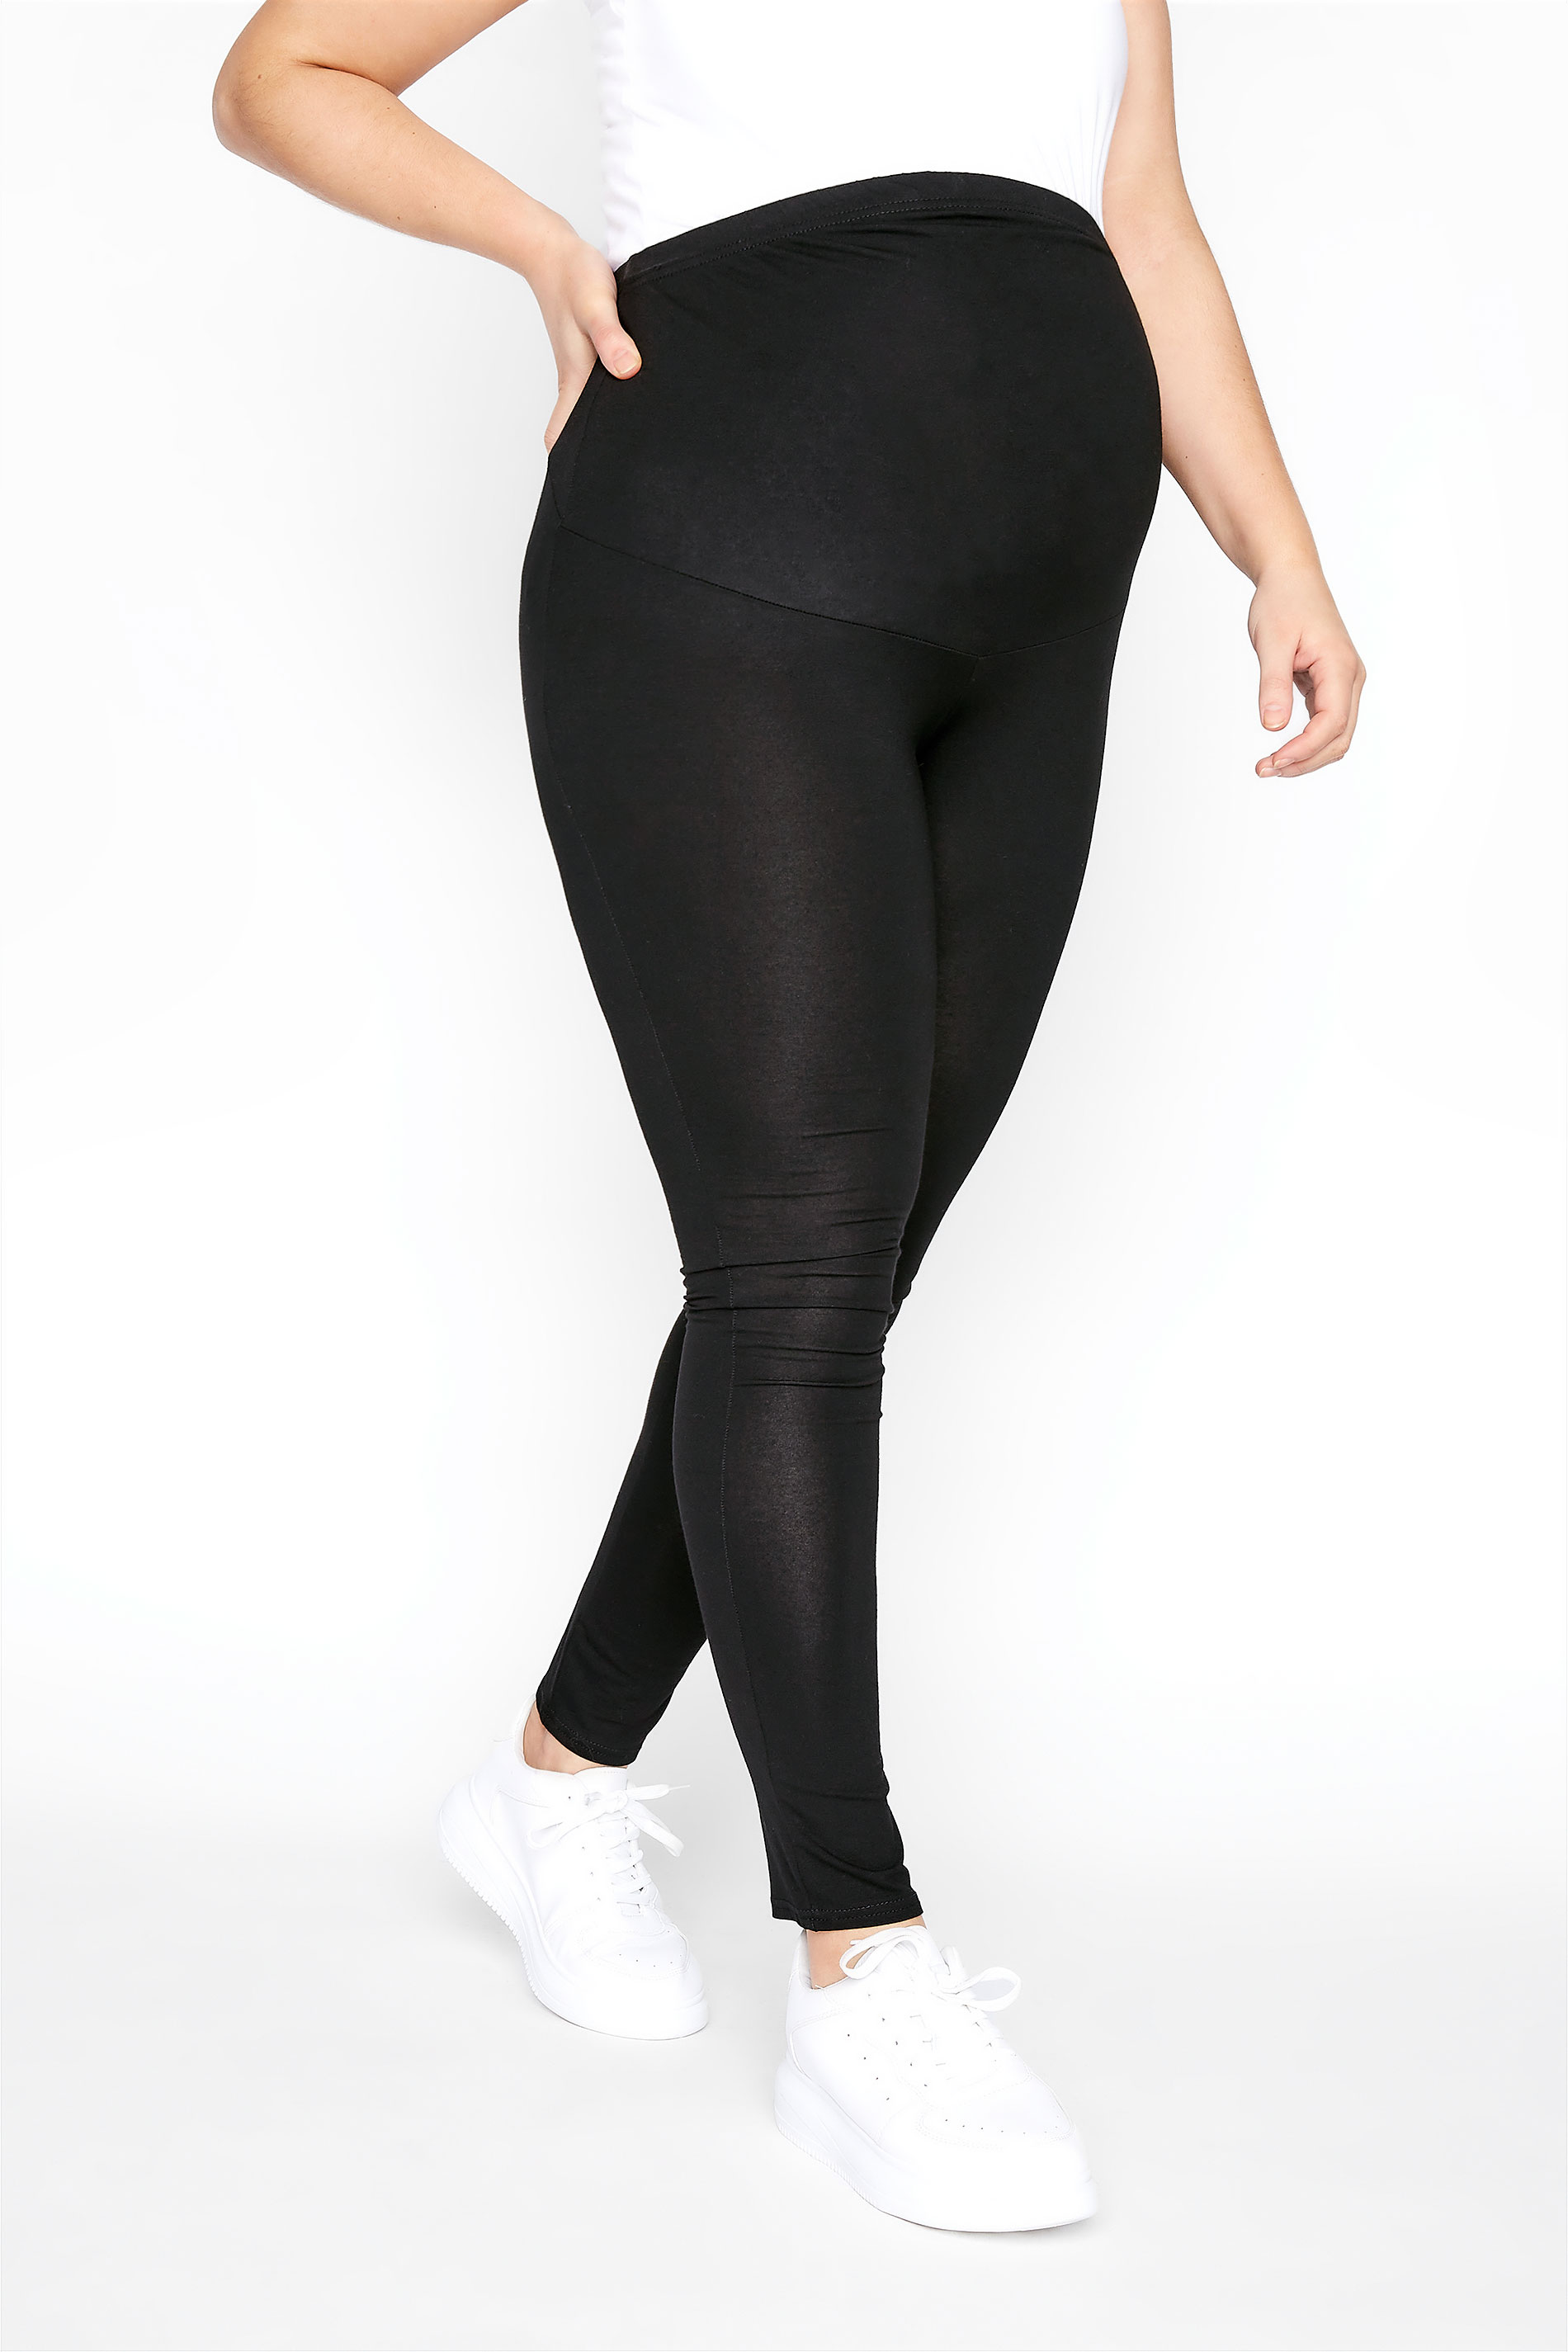 BUMP IT UP MATERNITY Black Jersey Leggings With Comfort Panel | Yours ...